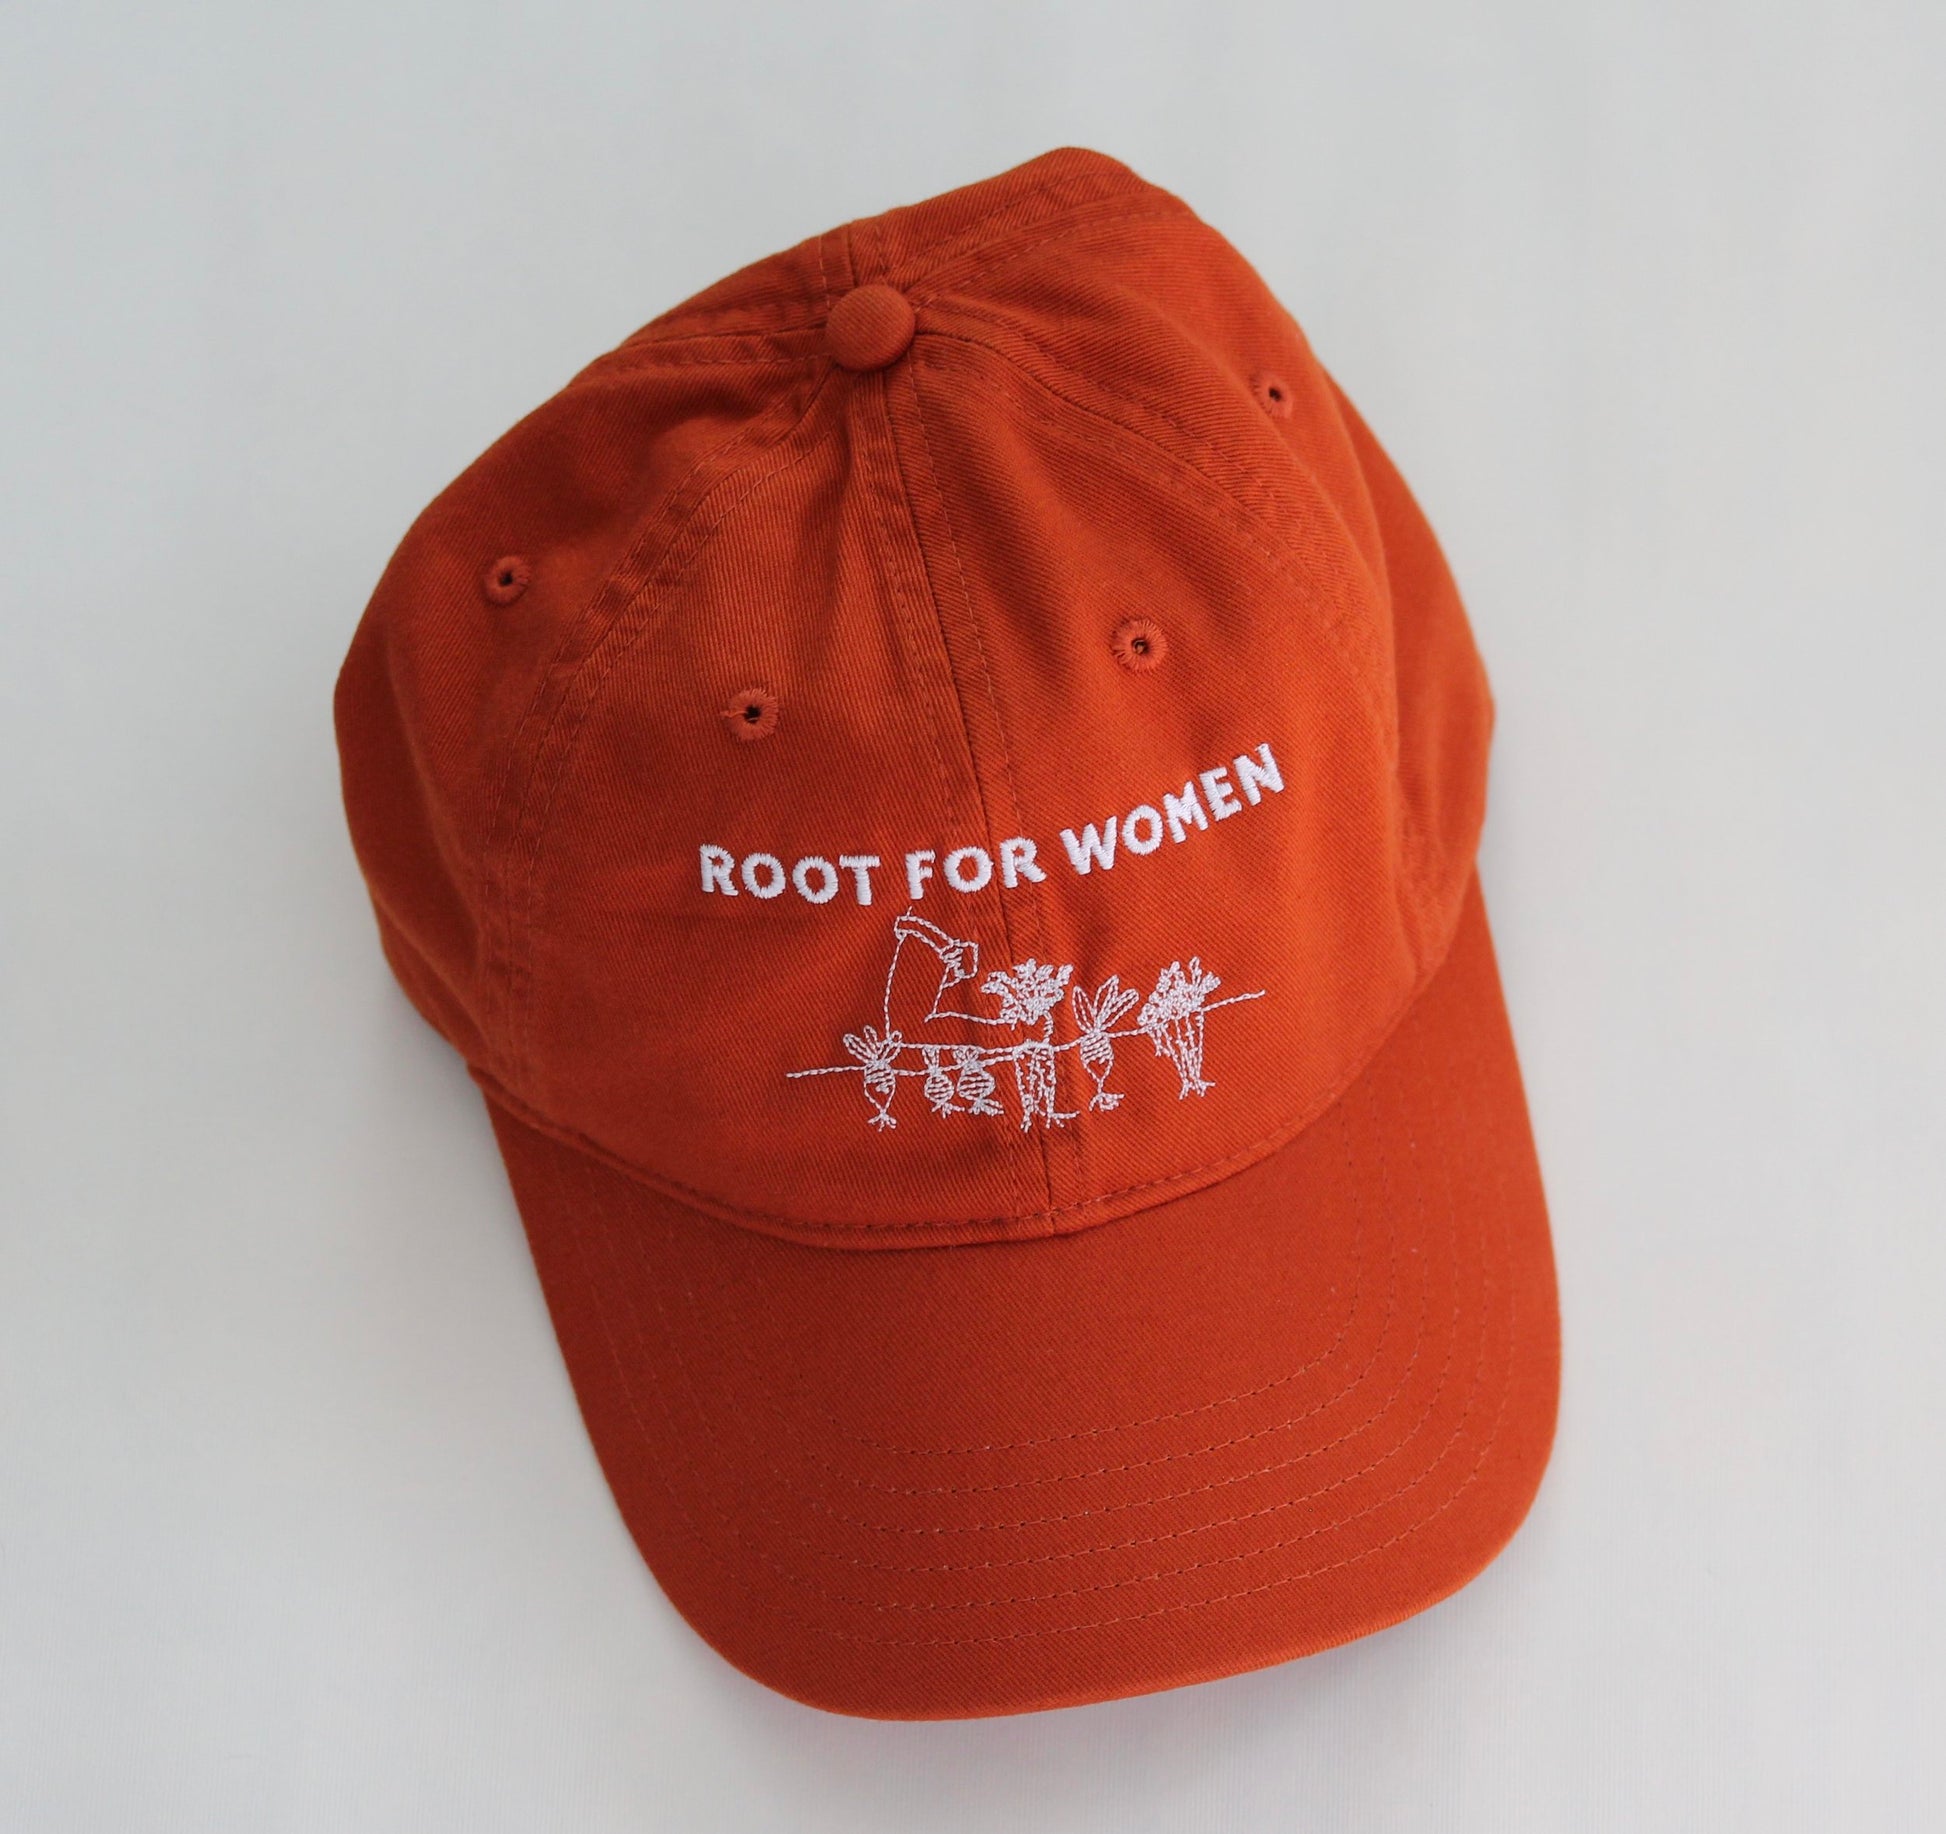 An orange hat reads "Root for Women" in white embroidery